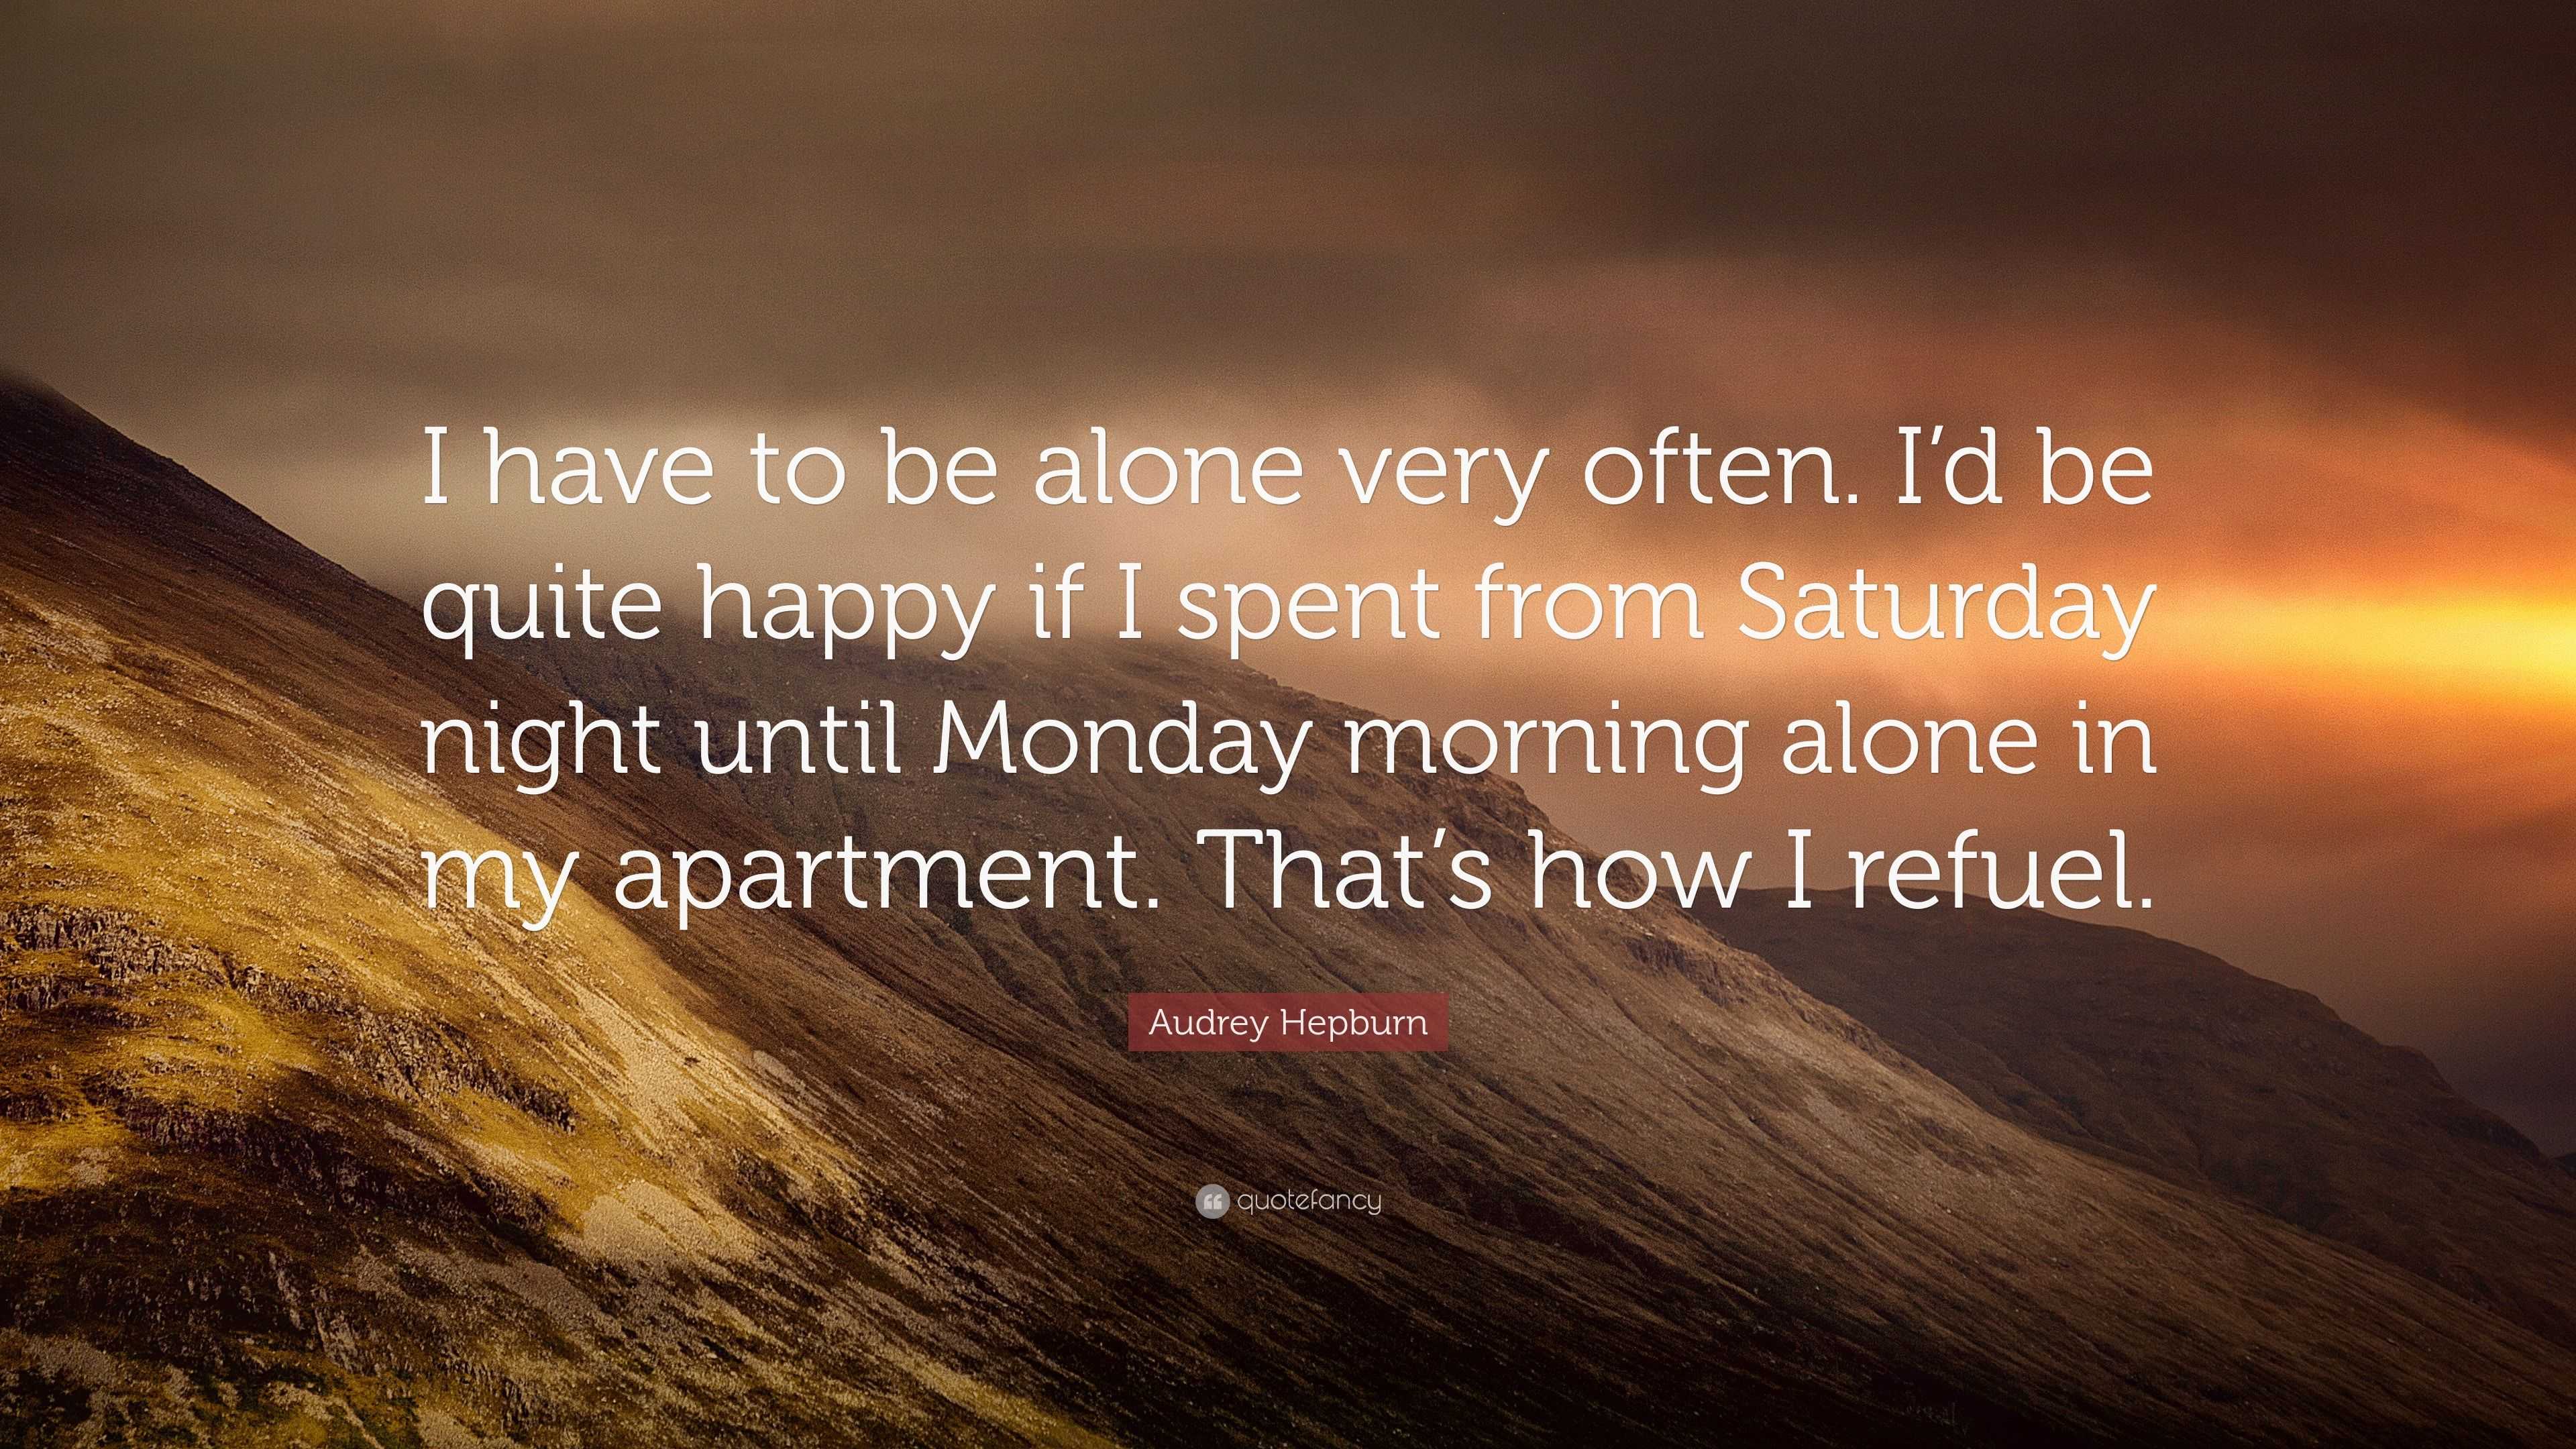 Audrey Hepburn Quote: “I have to be alone very often. I’d be quite ...